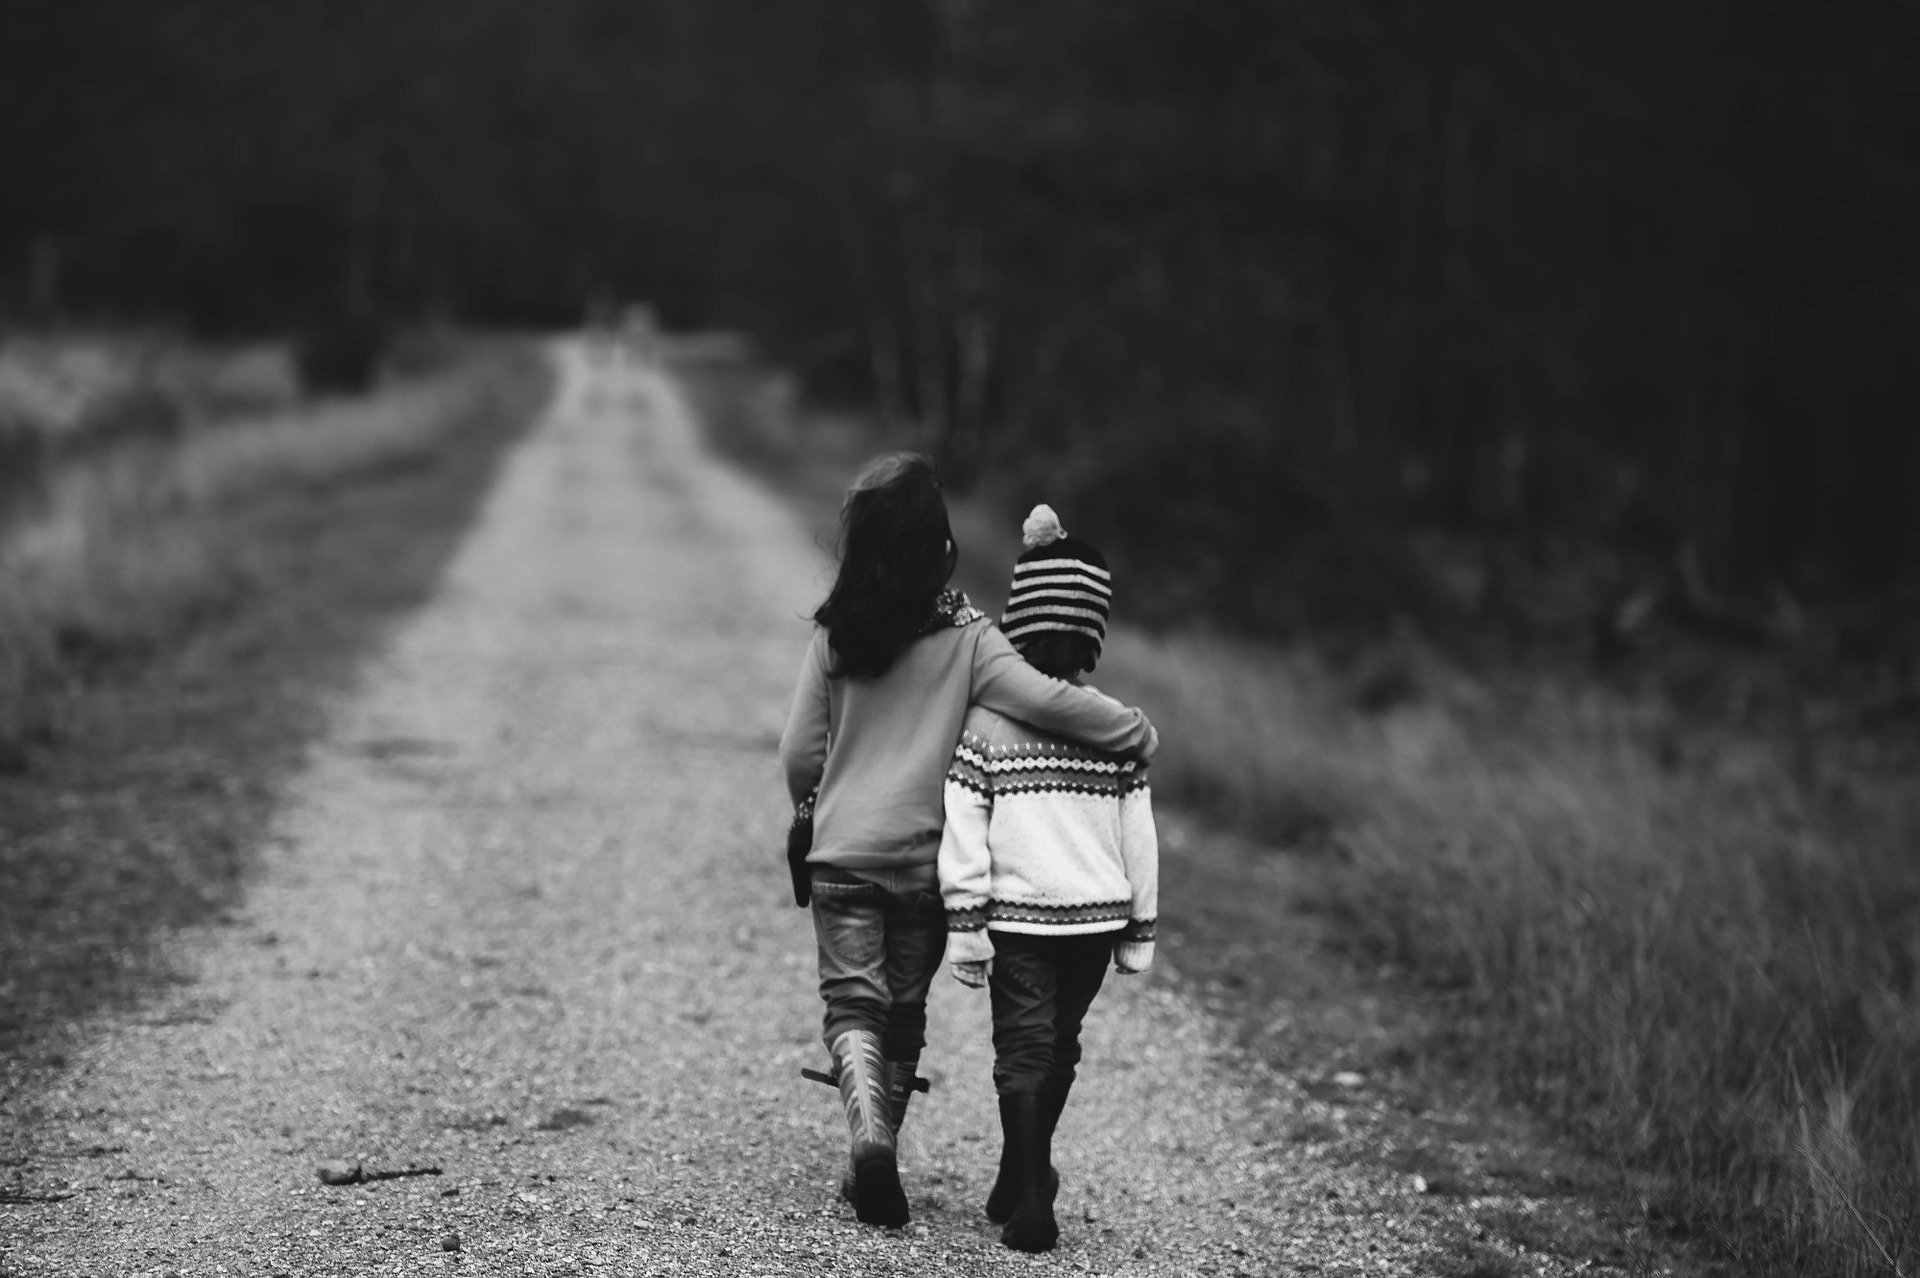 two kids, girl with arm around young boy, walking down a dirt road in the country